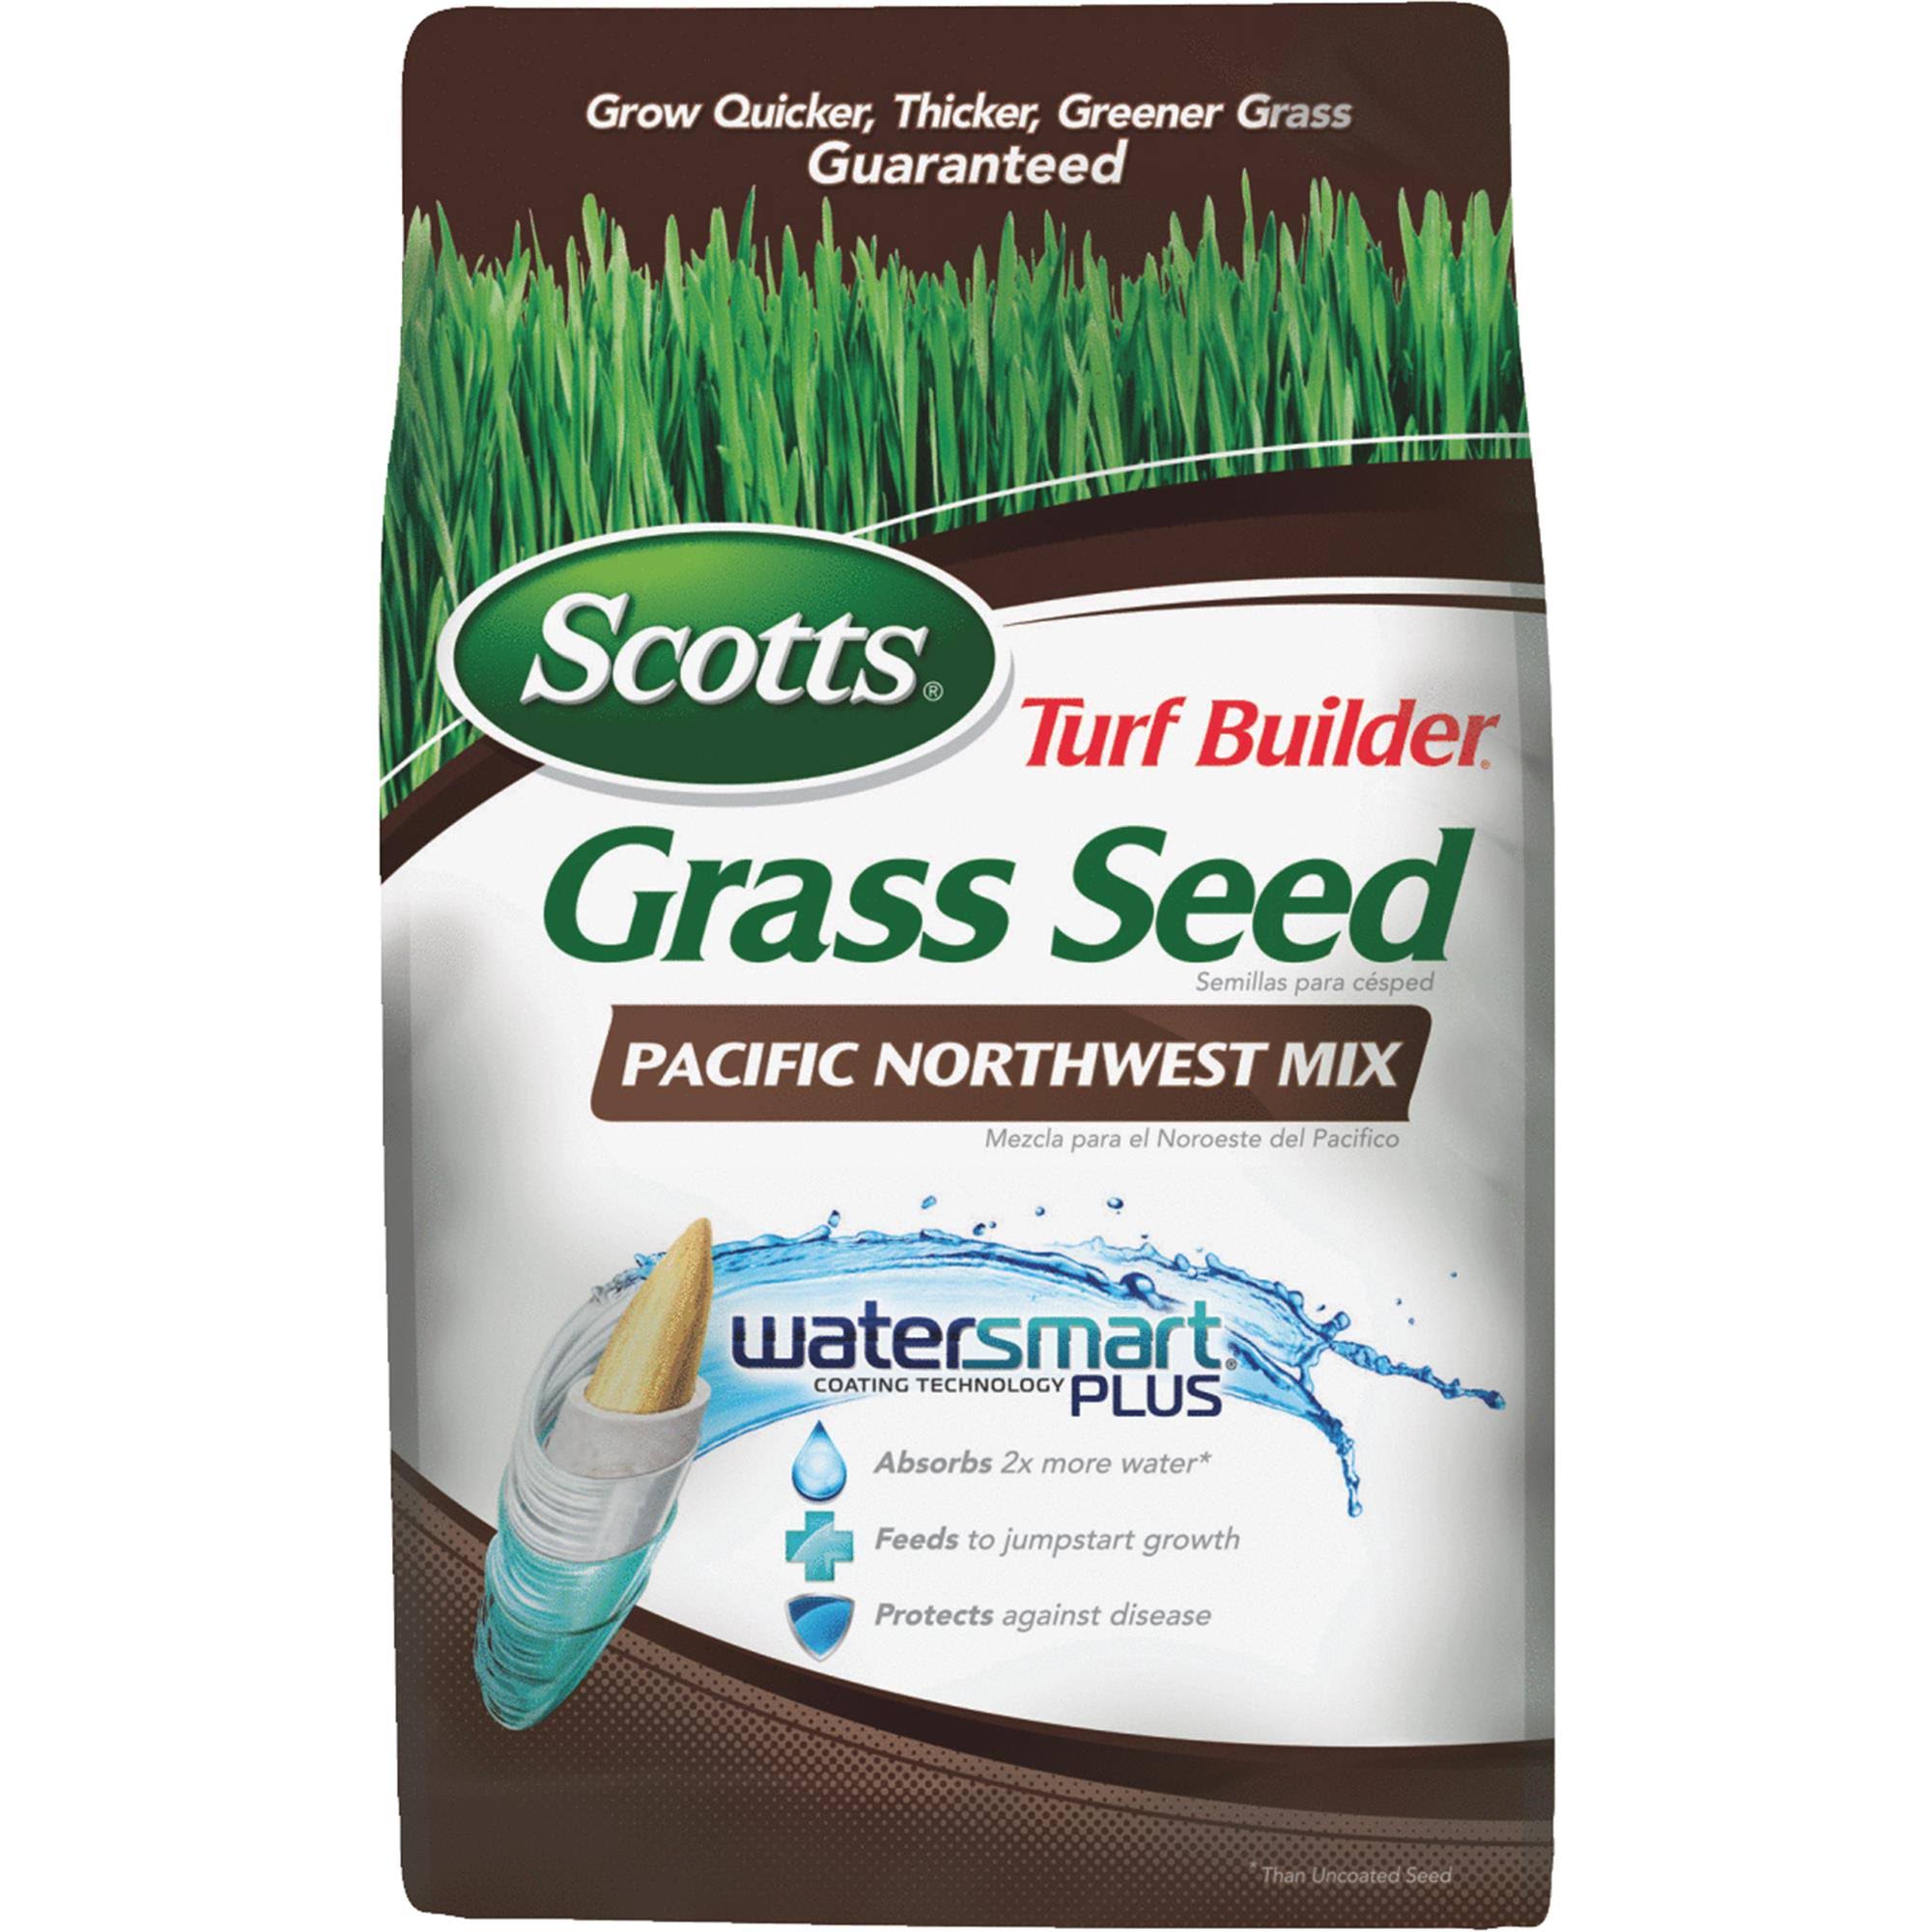 Scotts Turf Builder Grass Seed Pacific Northwest Mix - 3 lbs